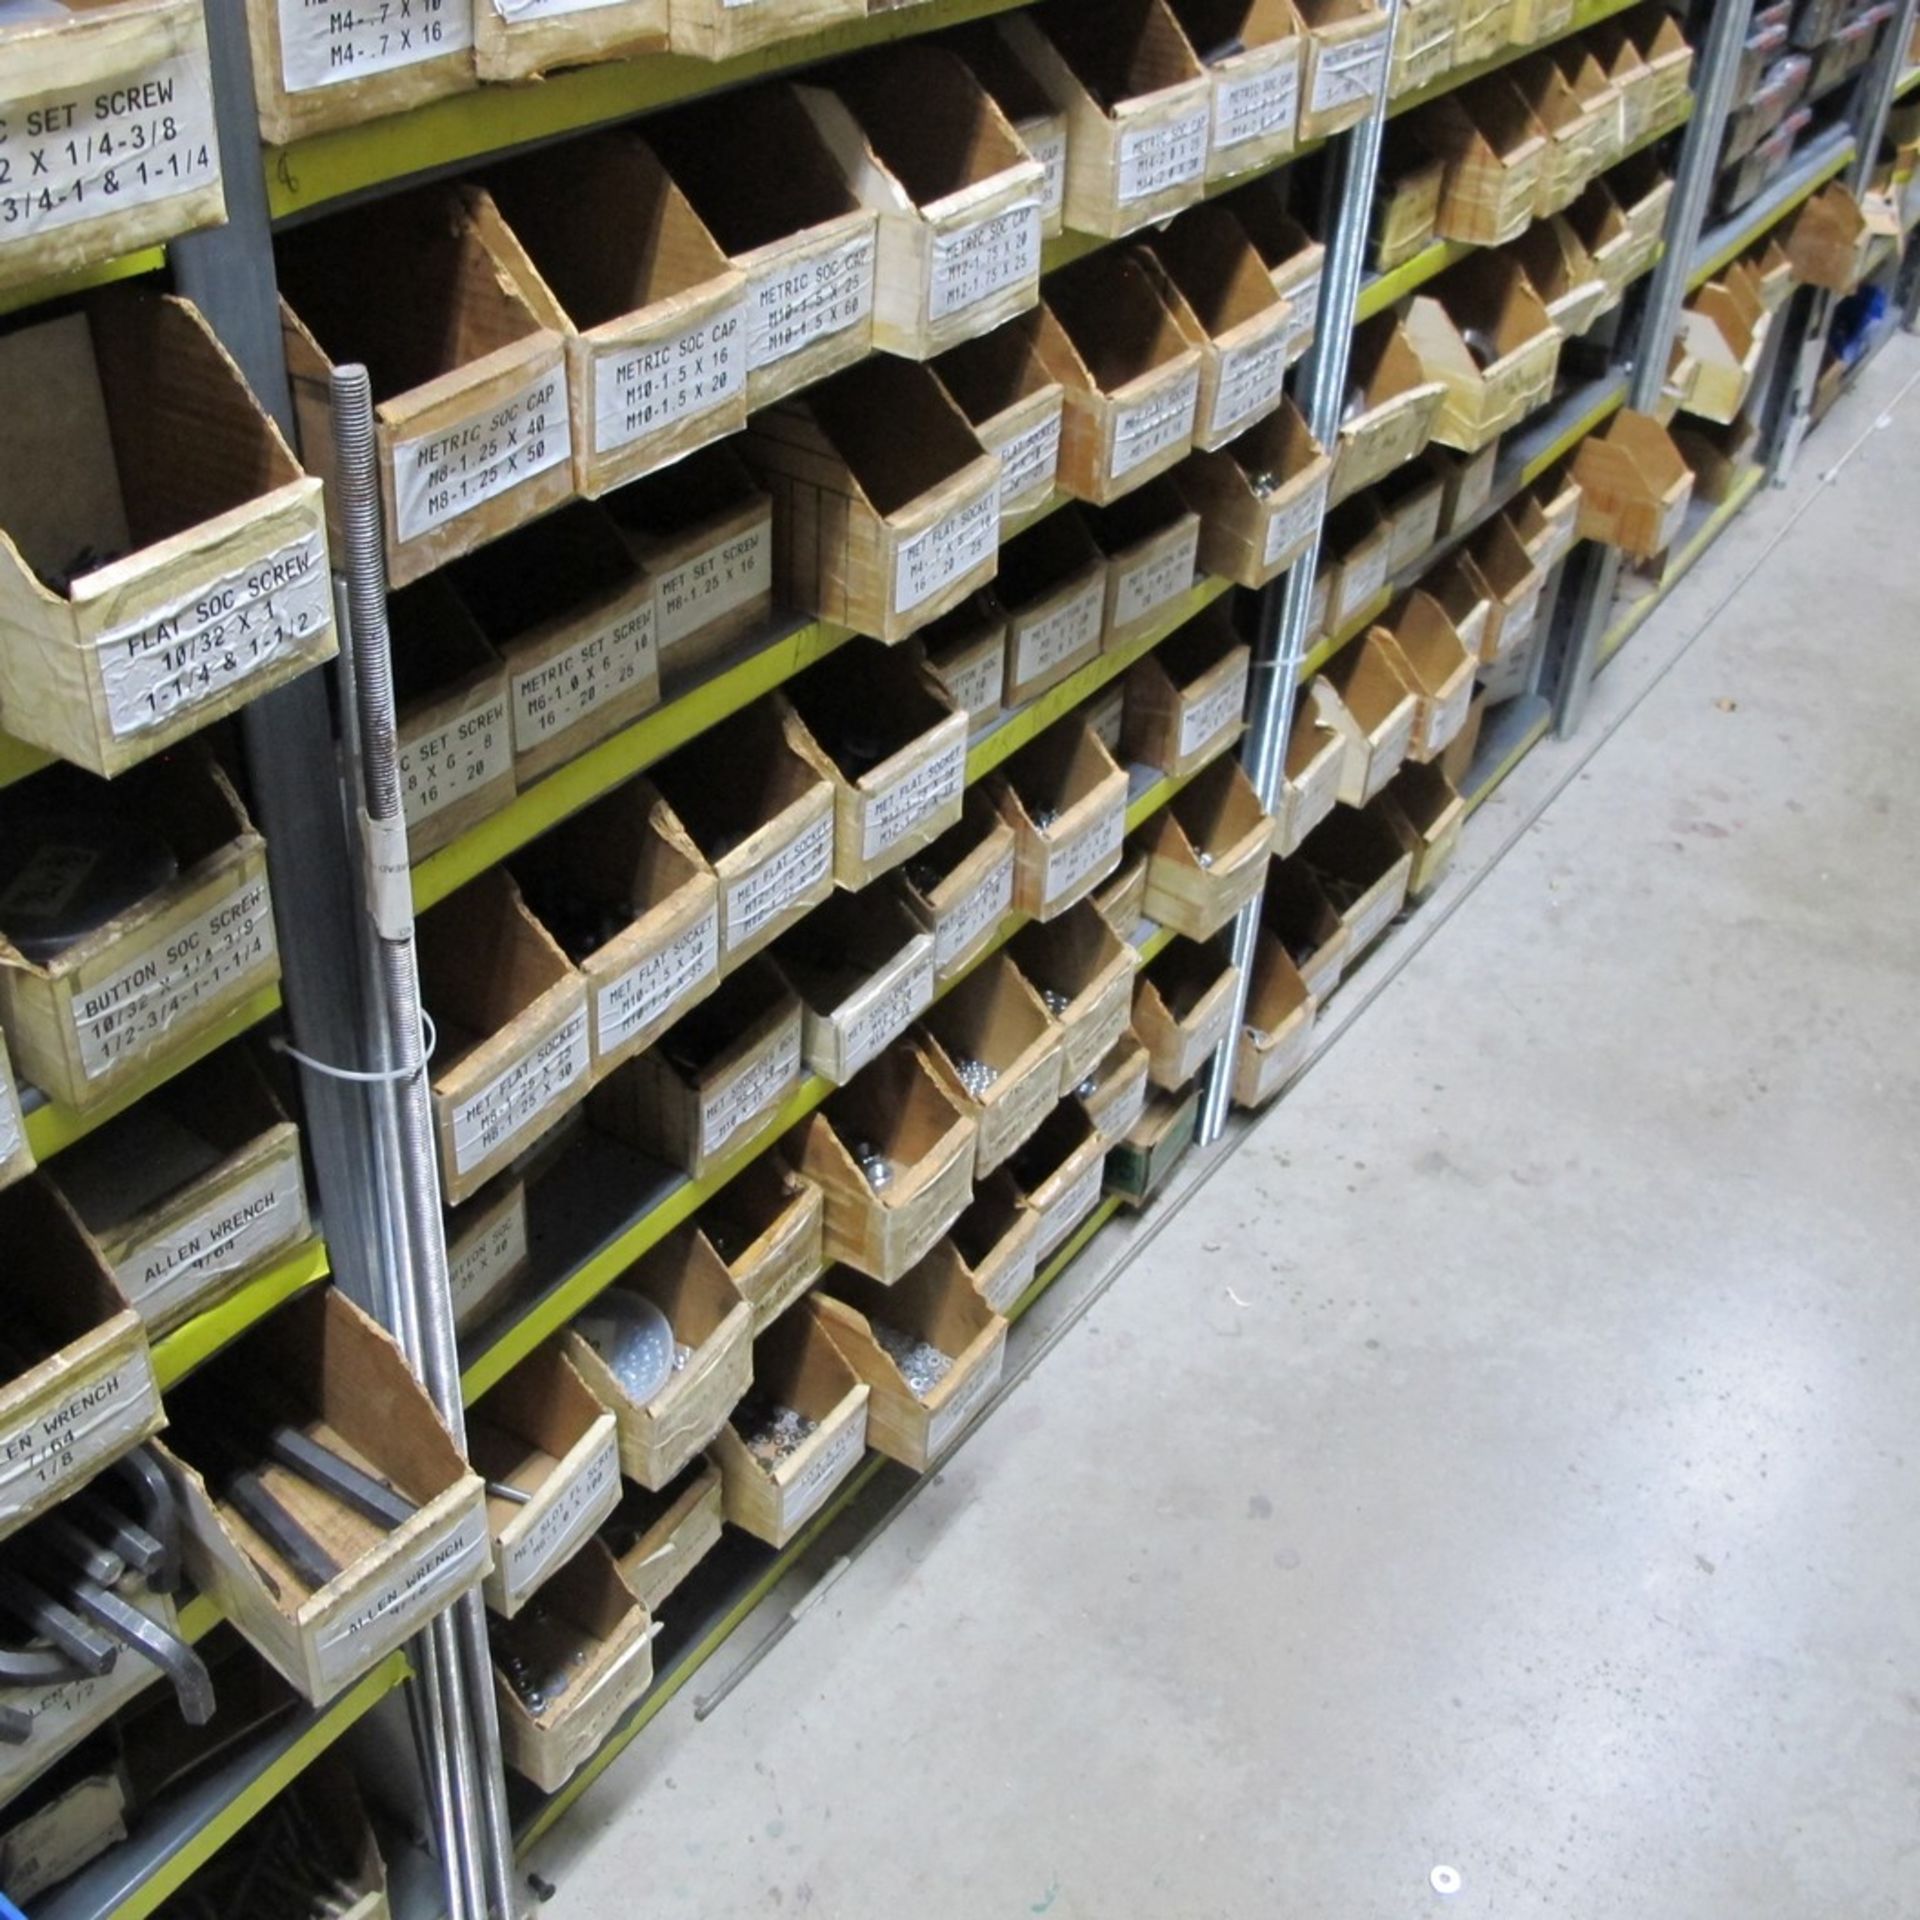 LOT OF ASST. FASTENERS, PARTS CABINETS, SHIM STOCK, SPRINGS, TURN BUCKLE HOOKS, MARKHAM IMAGE - Image 8 of 26